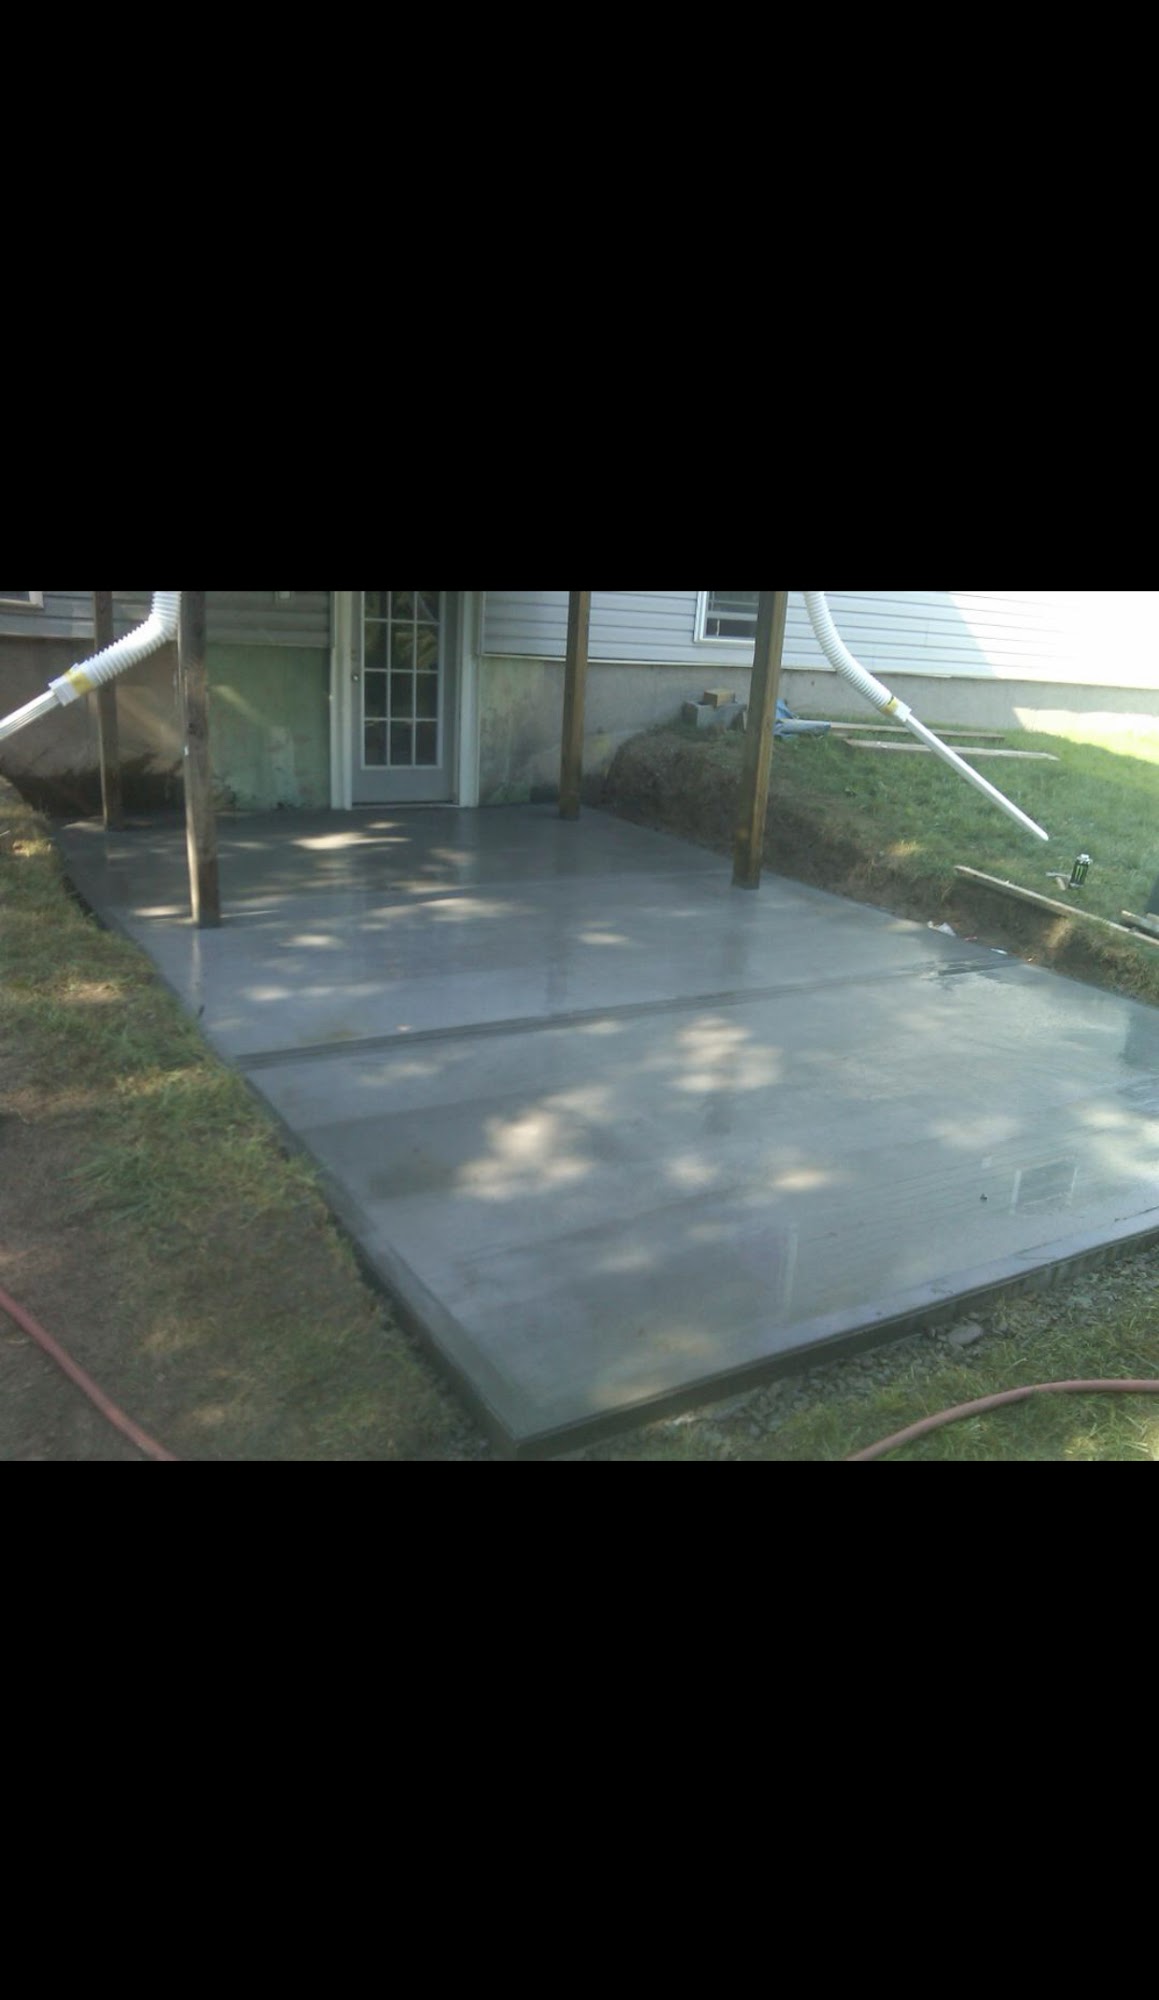 Rock Solid Concrete 7613 NY-298, Kirkville New York 13082